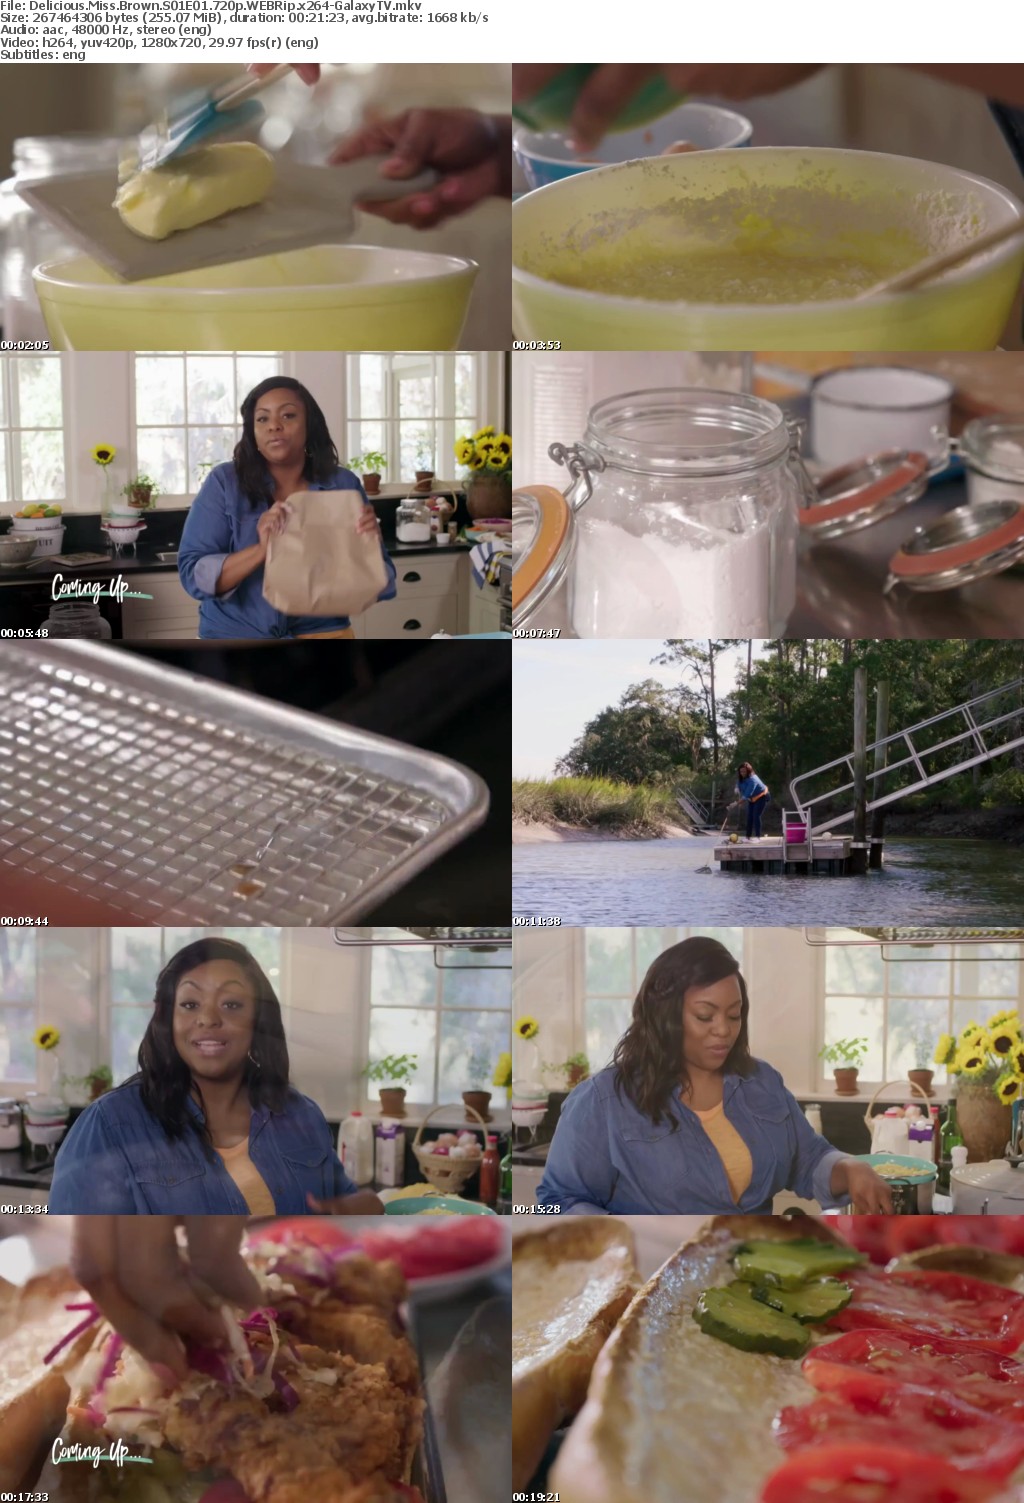 Delicious Miss Brown S01 COMPLETE 720p WEBRip x264-GalaxyTV